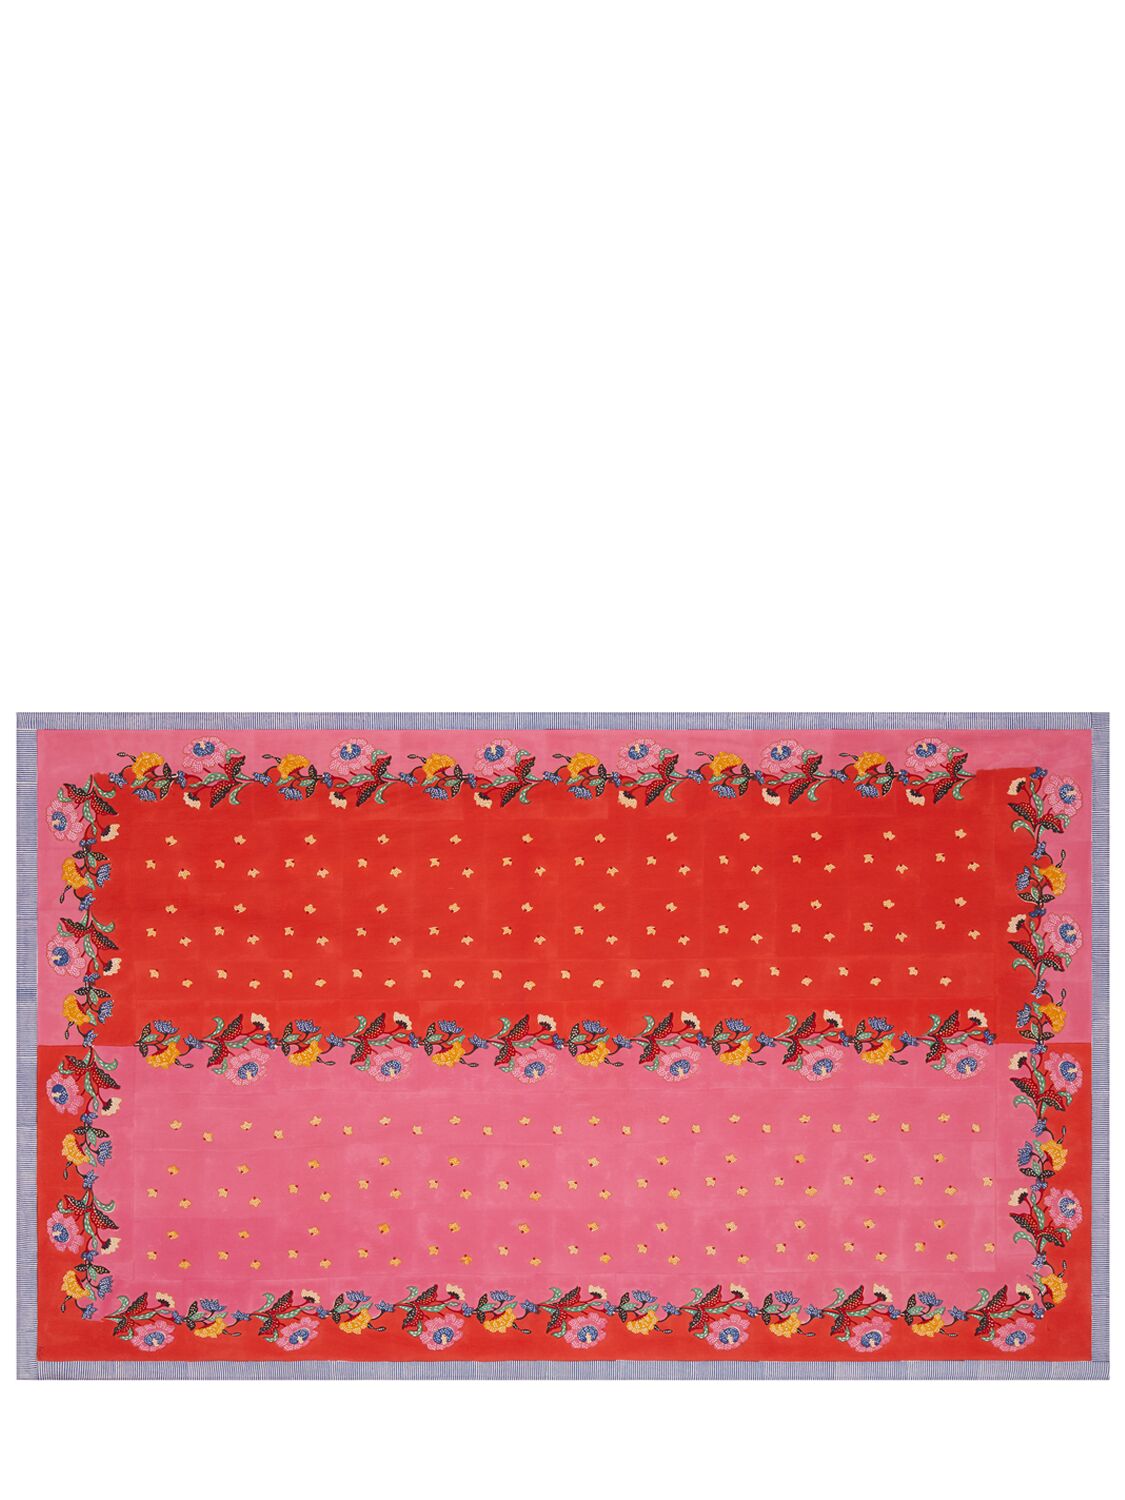 Lisa Corti Indonesian Red Rose Tablecloth